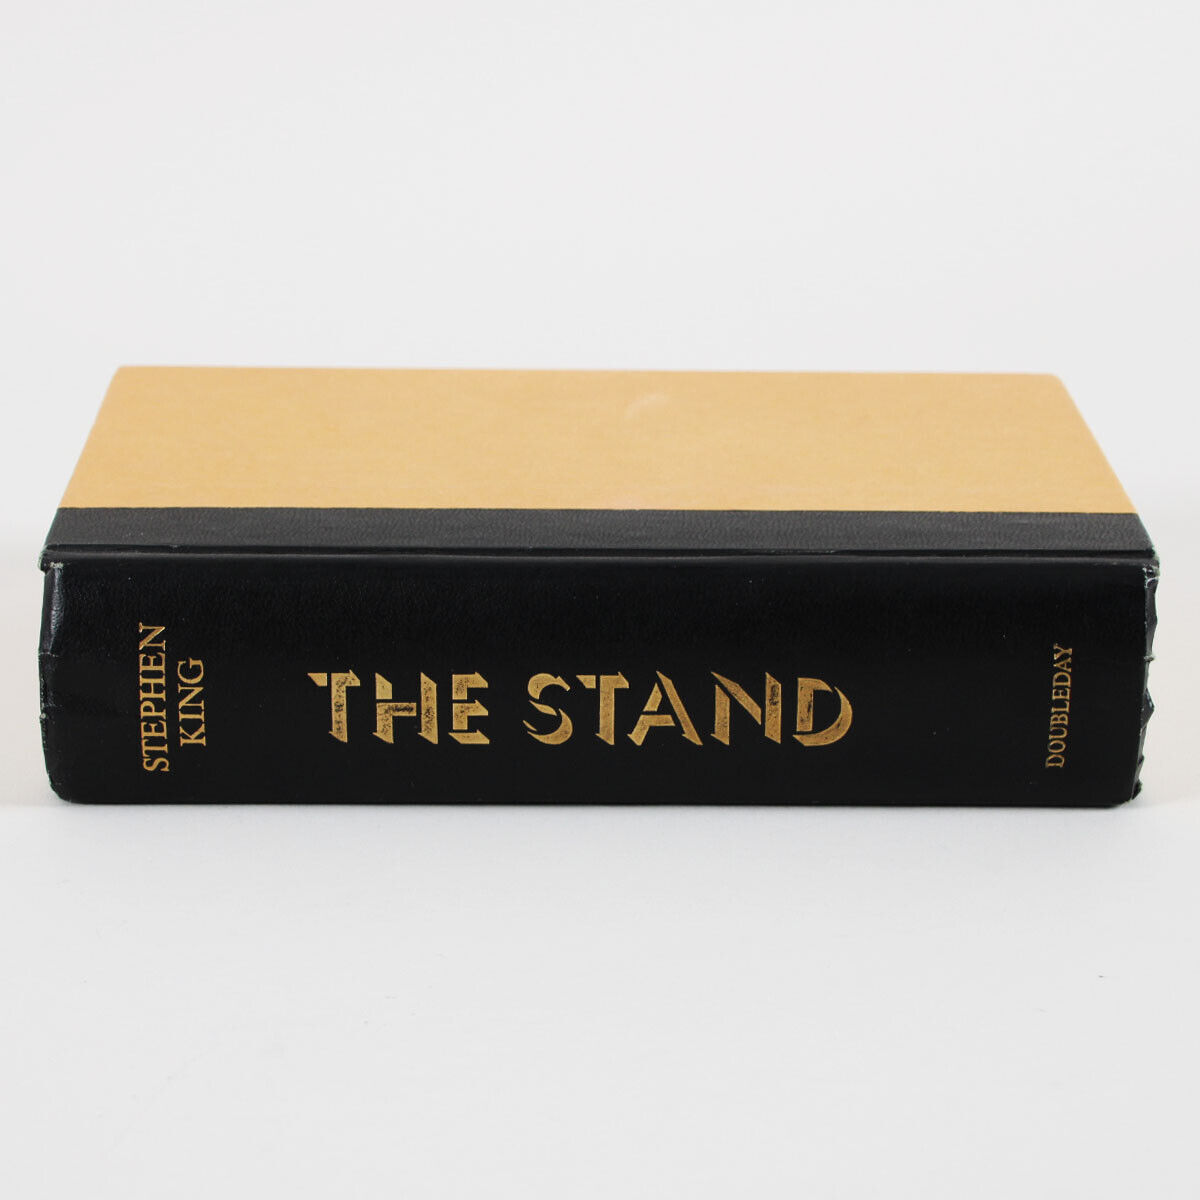 Stephen King Signed Book The Stand – COA JSA